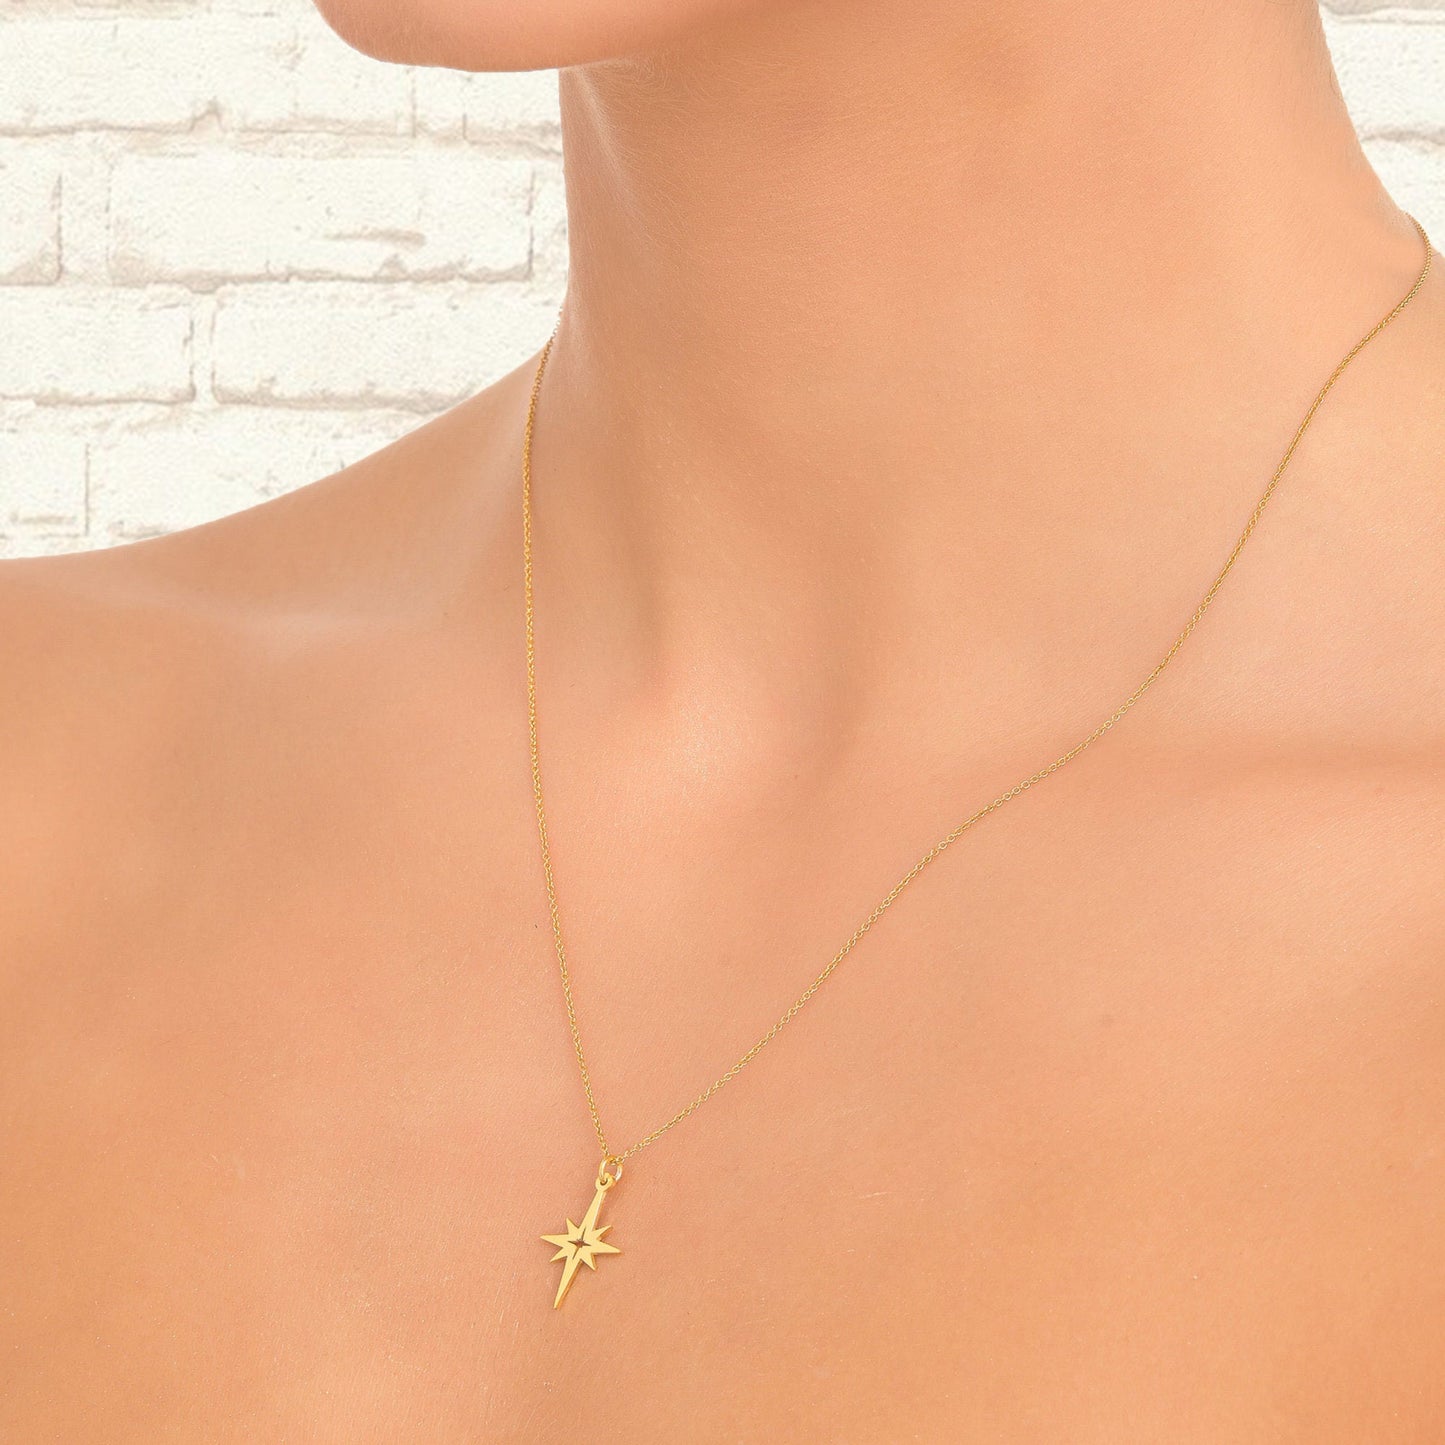 Northstar necklace in solid gold, Celestial star necklace for women, Dainty solid gold Star charm, layering Starburst necklace for women